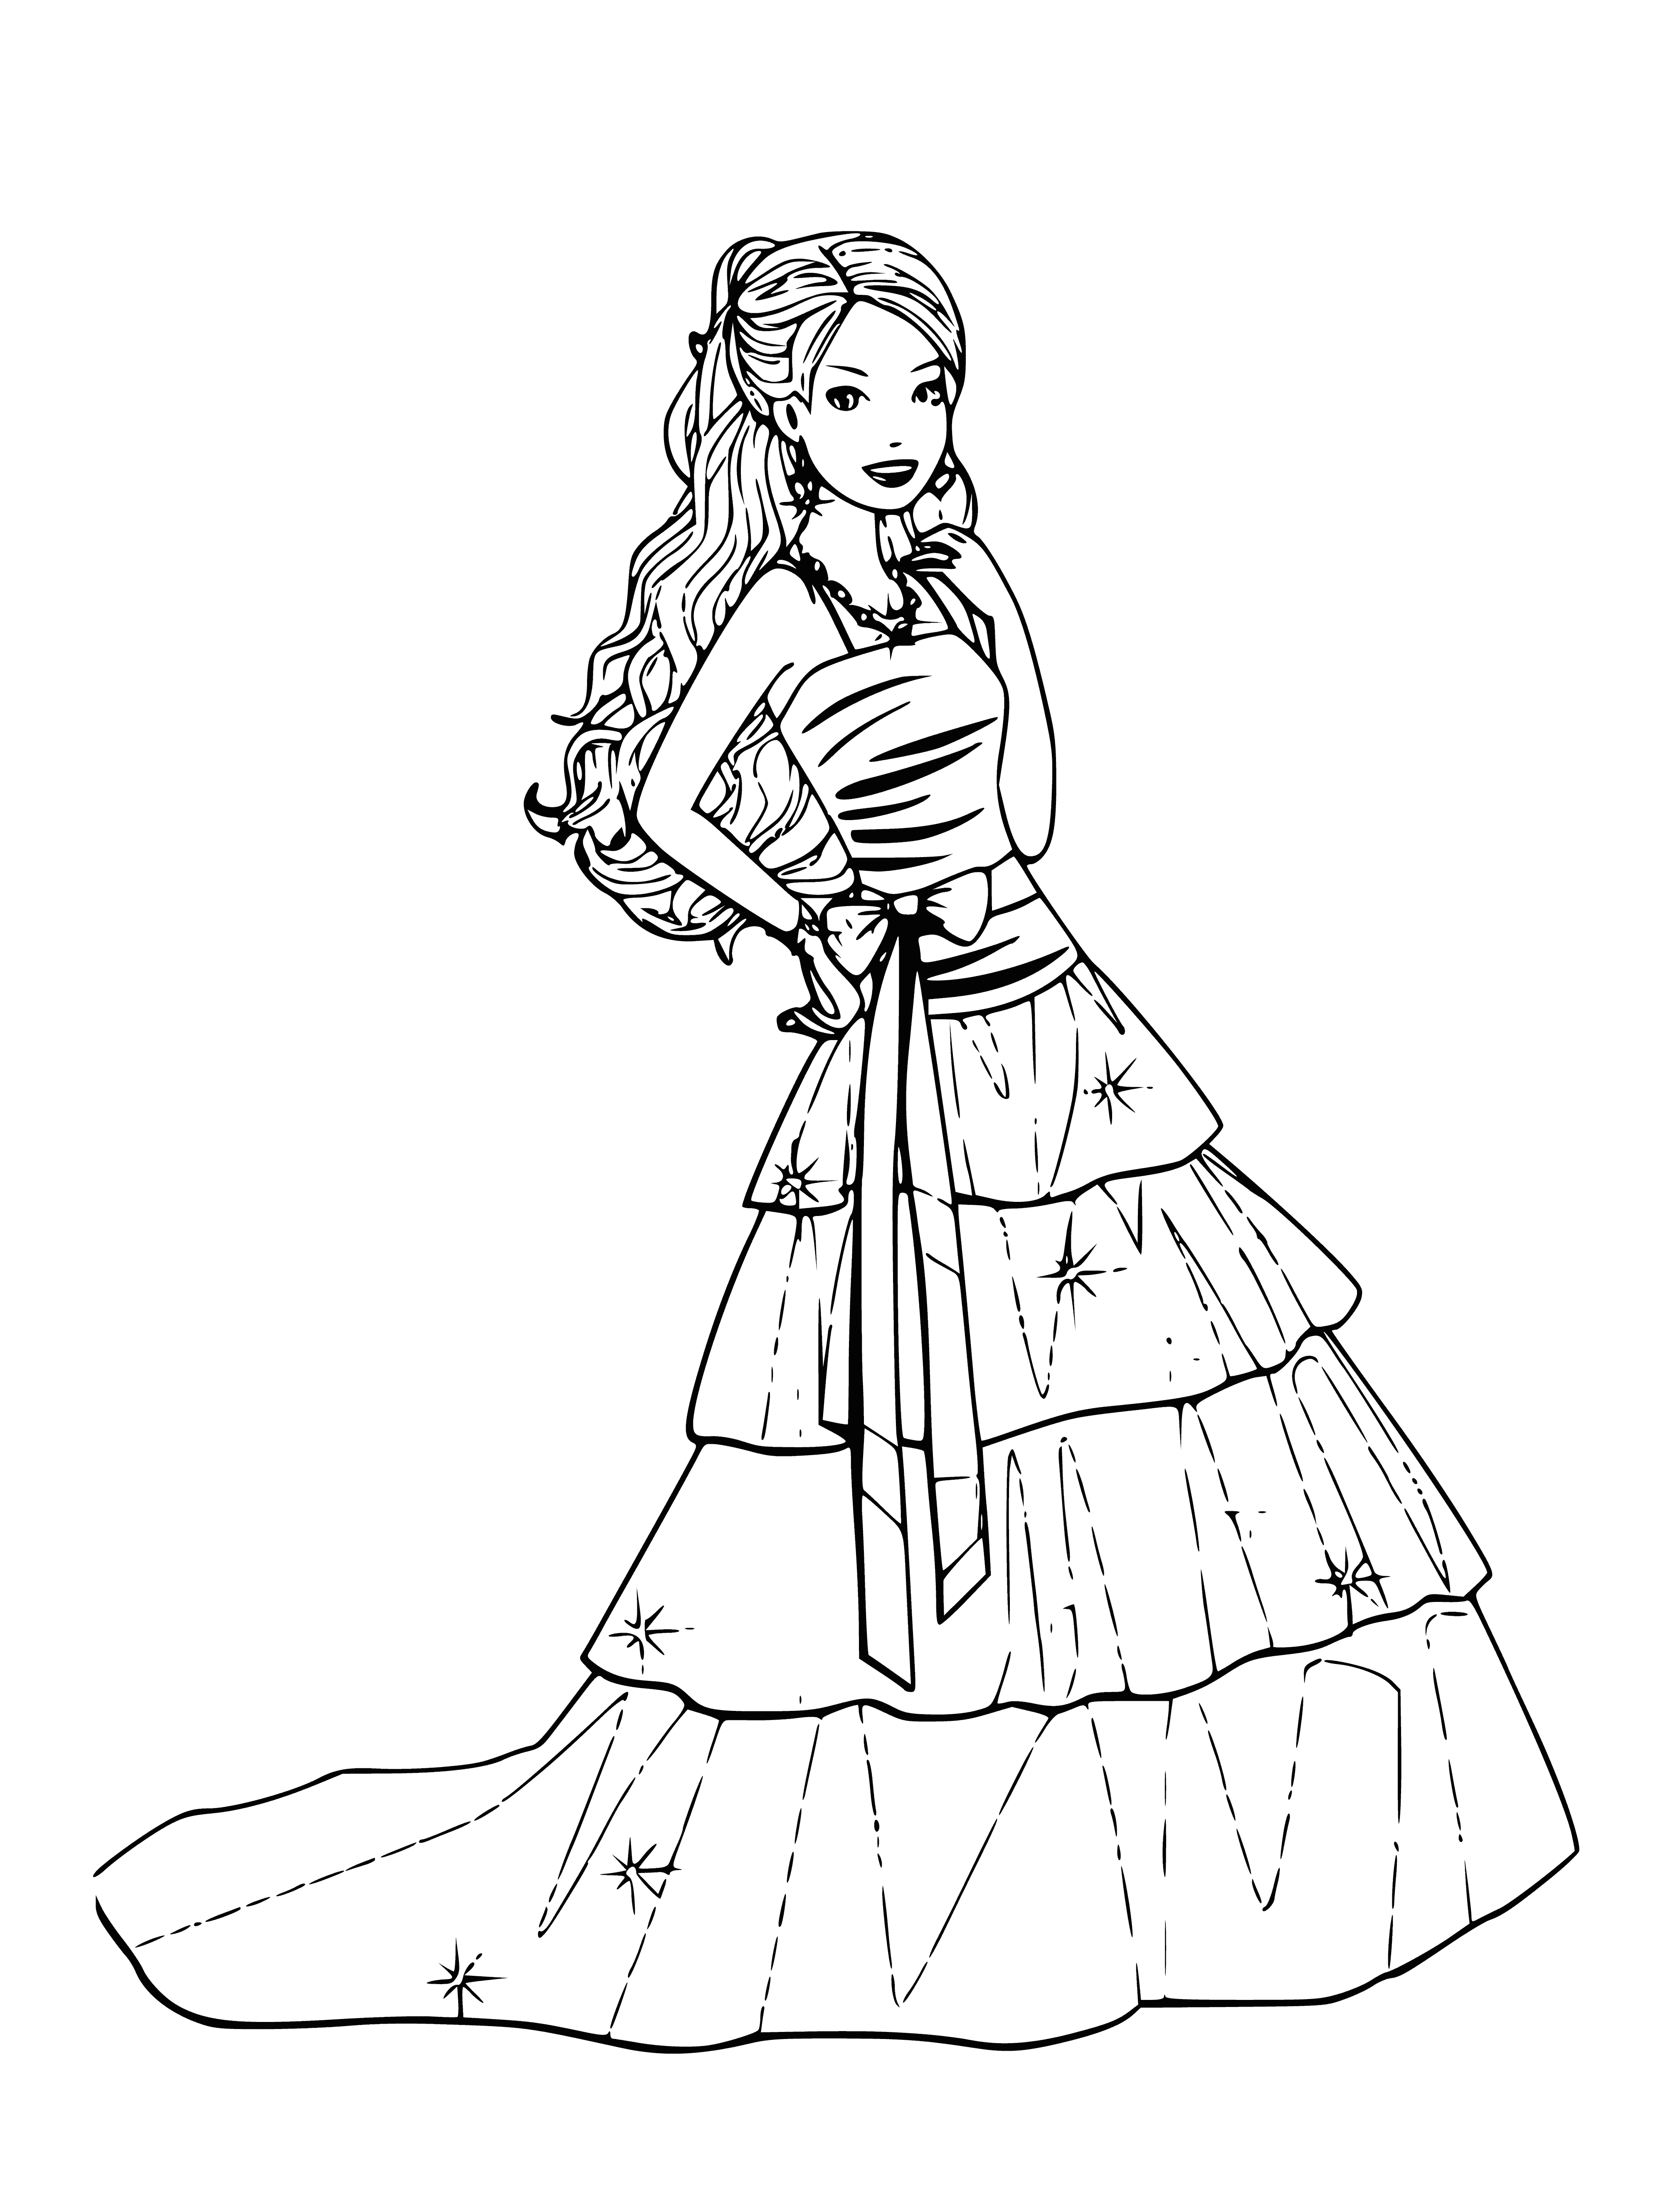 coloring page: Barbie wears an elegant white dress with a black ribbon, black heels, and accessorizes with pearl earrings and necklace. Her hair is styled in a loose bun.